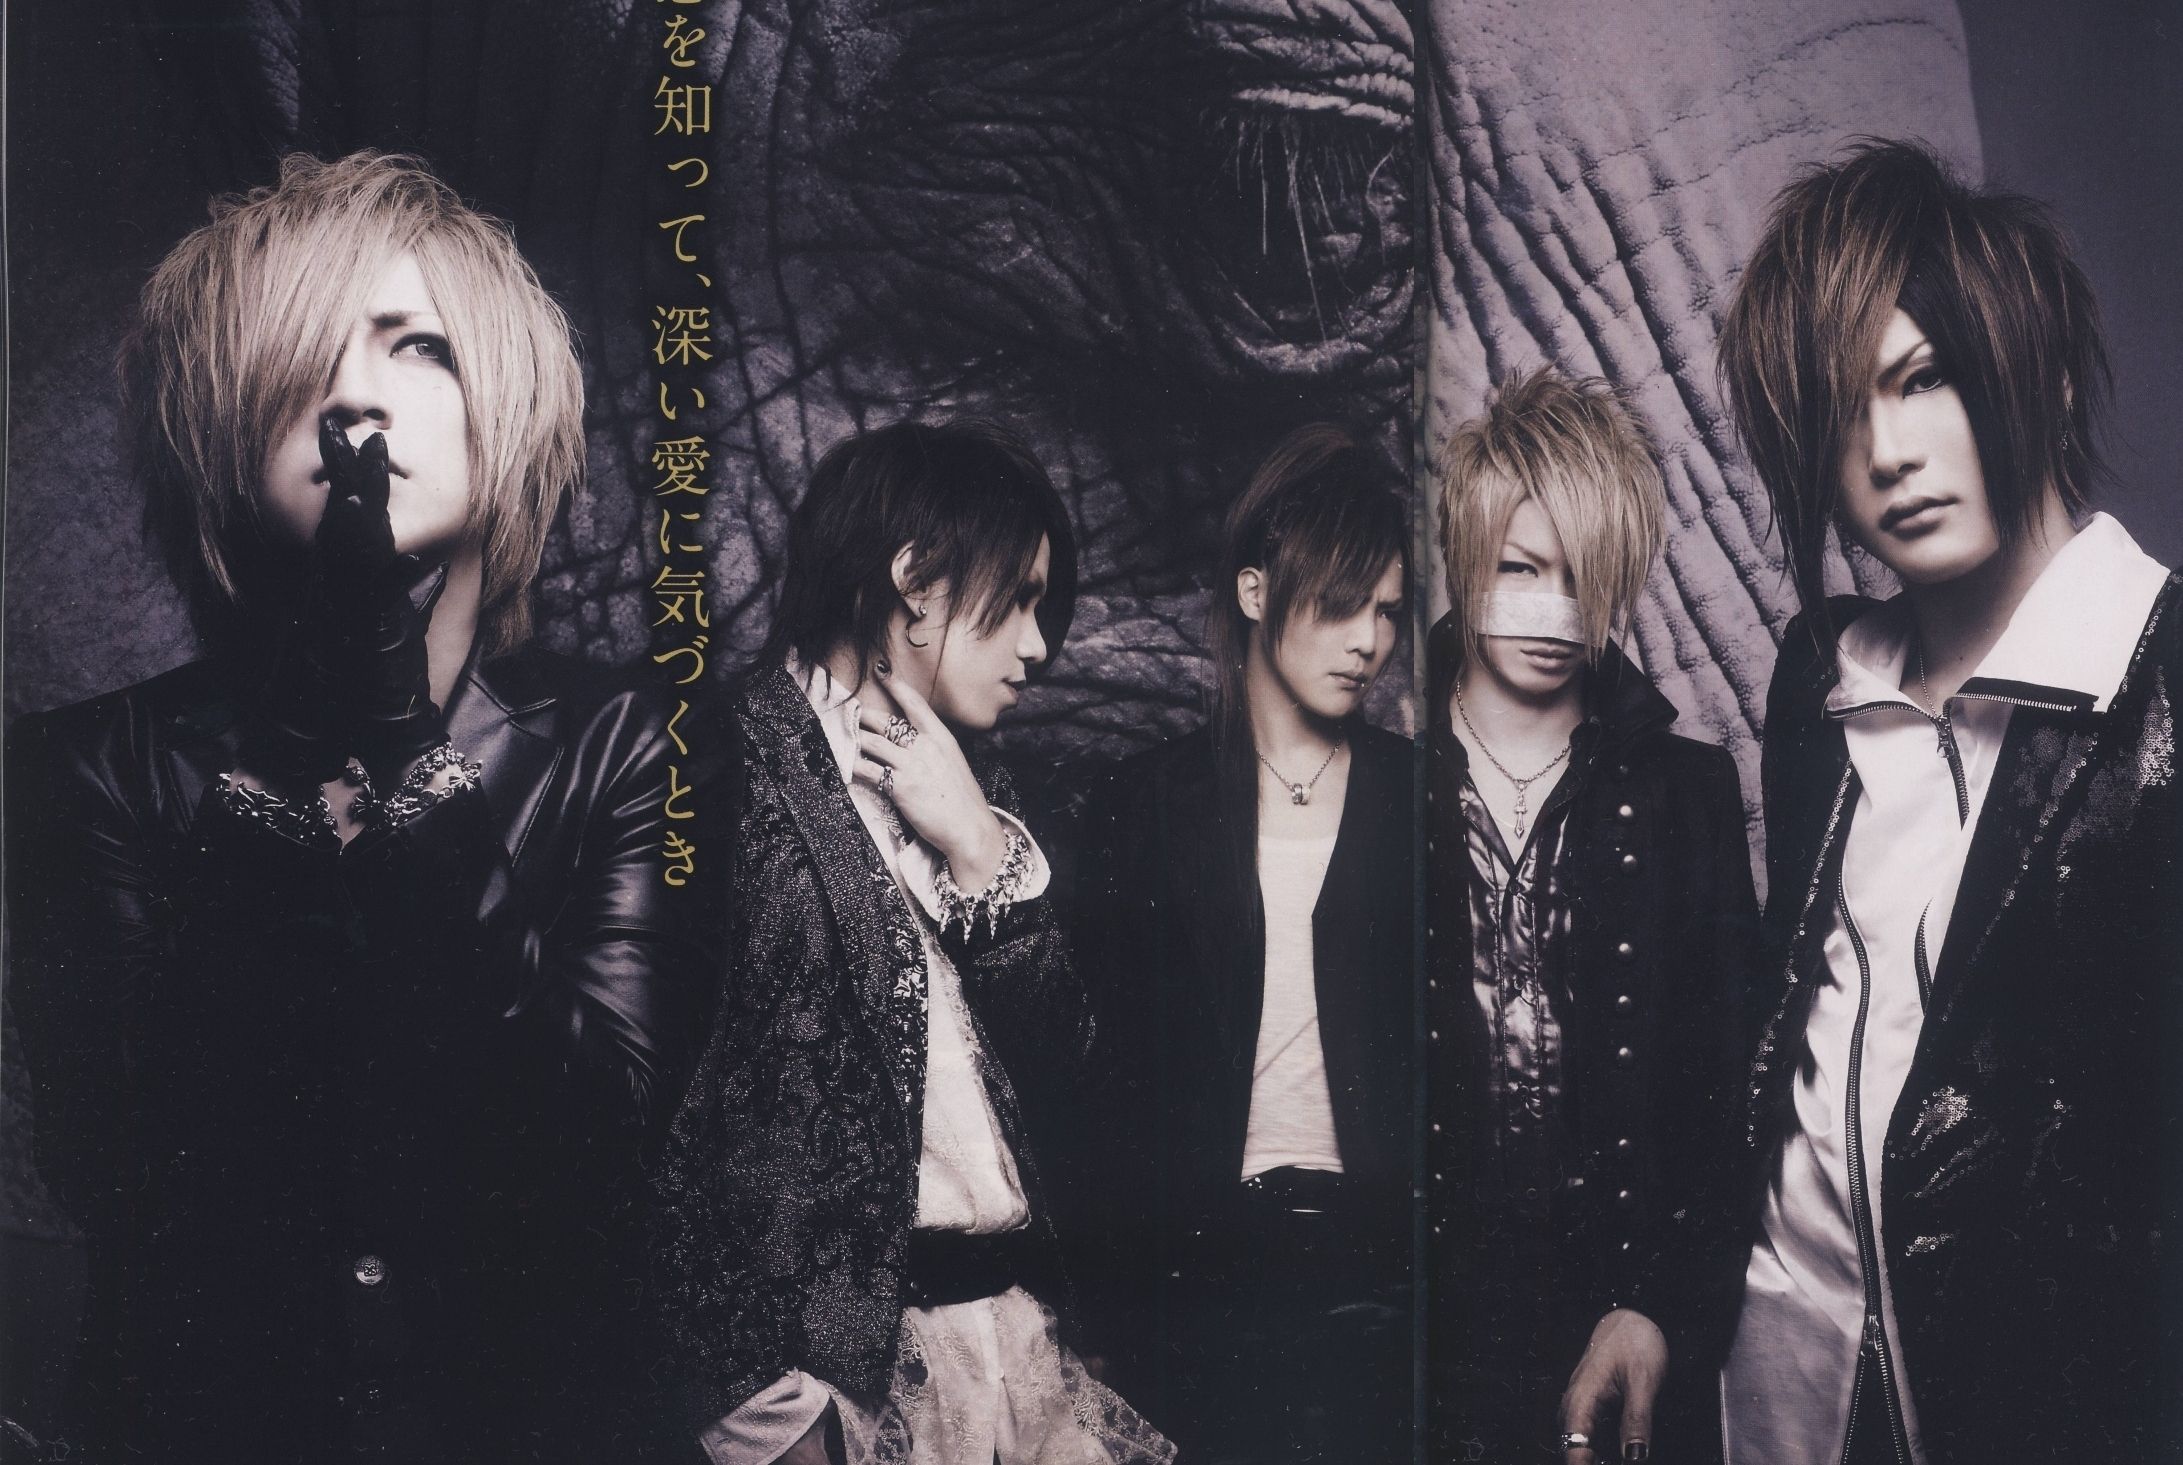 Gazette and Scan Gallery